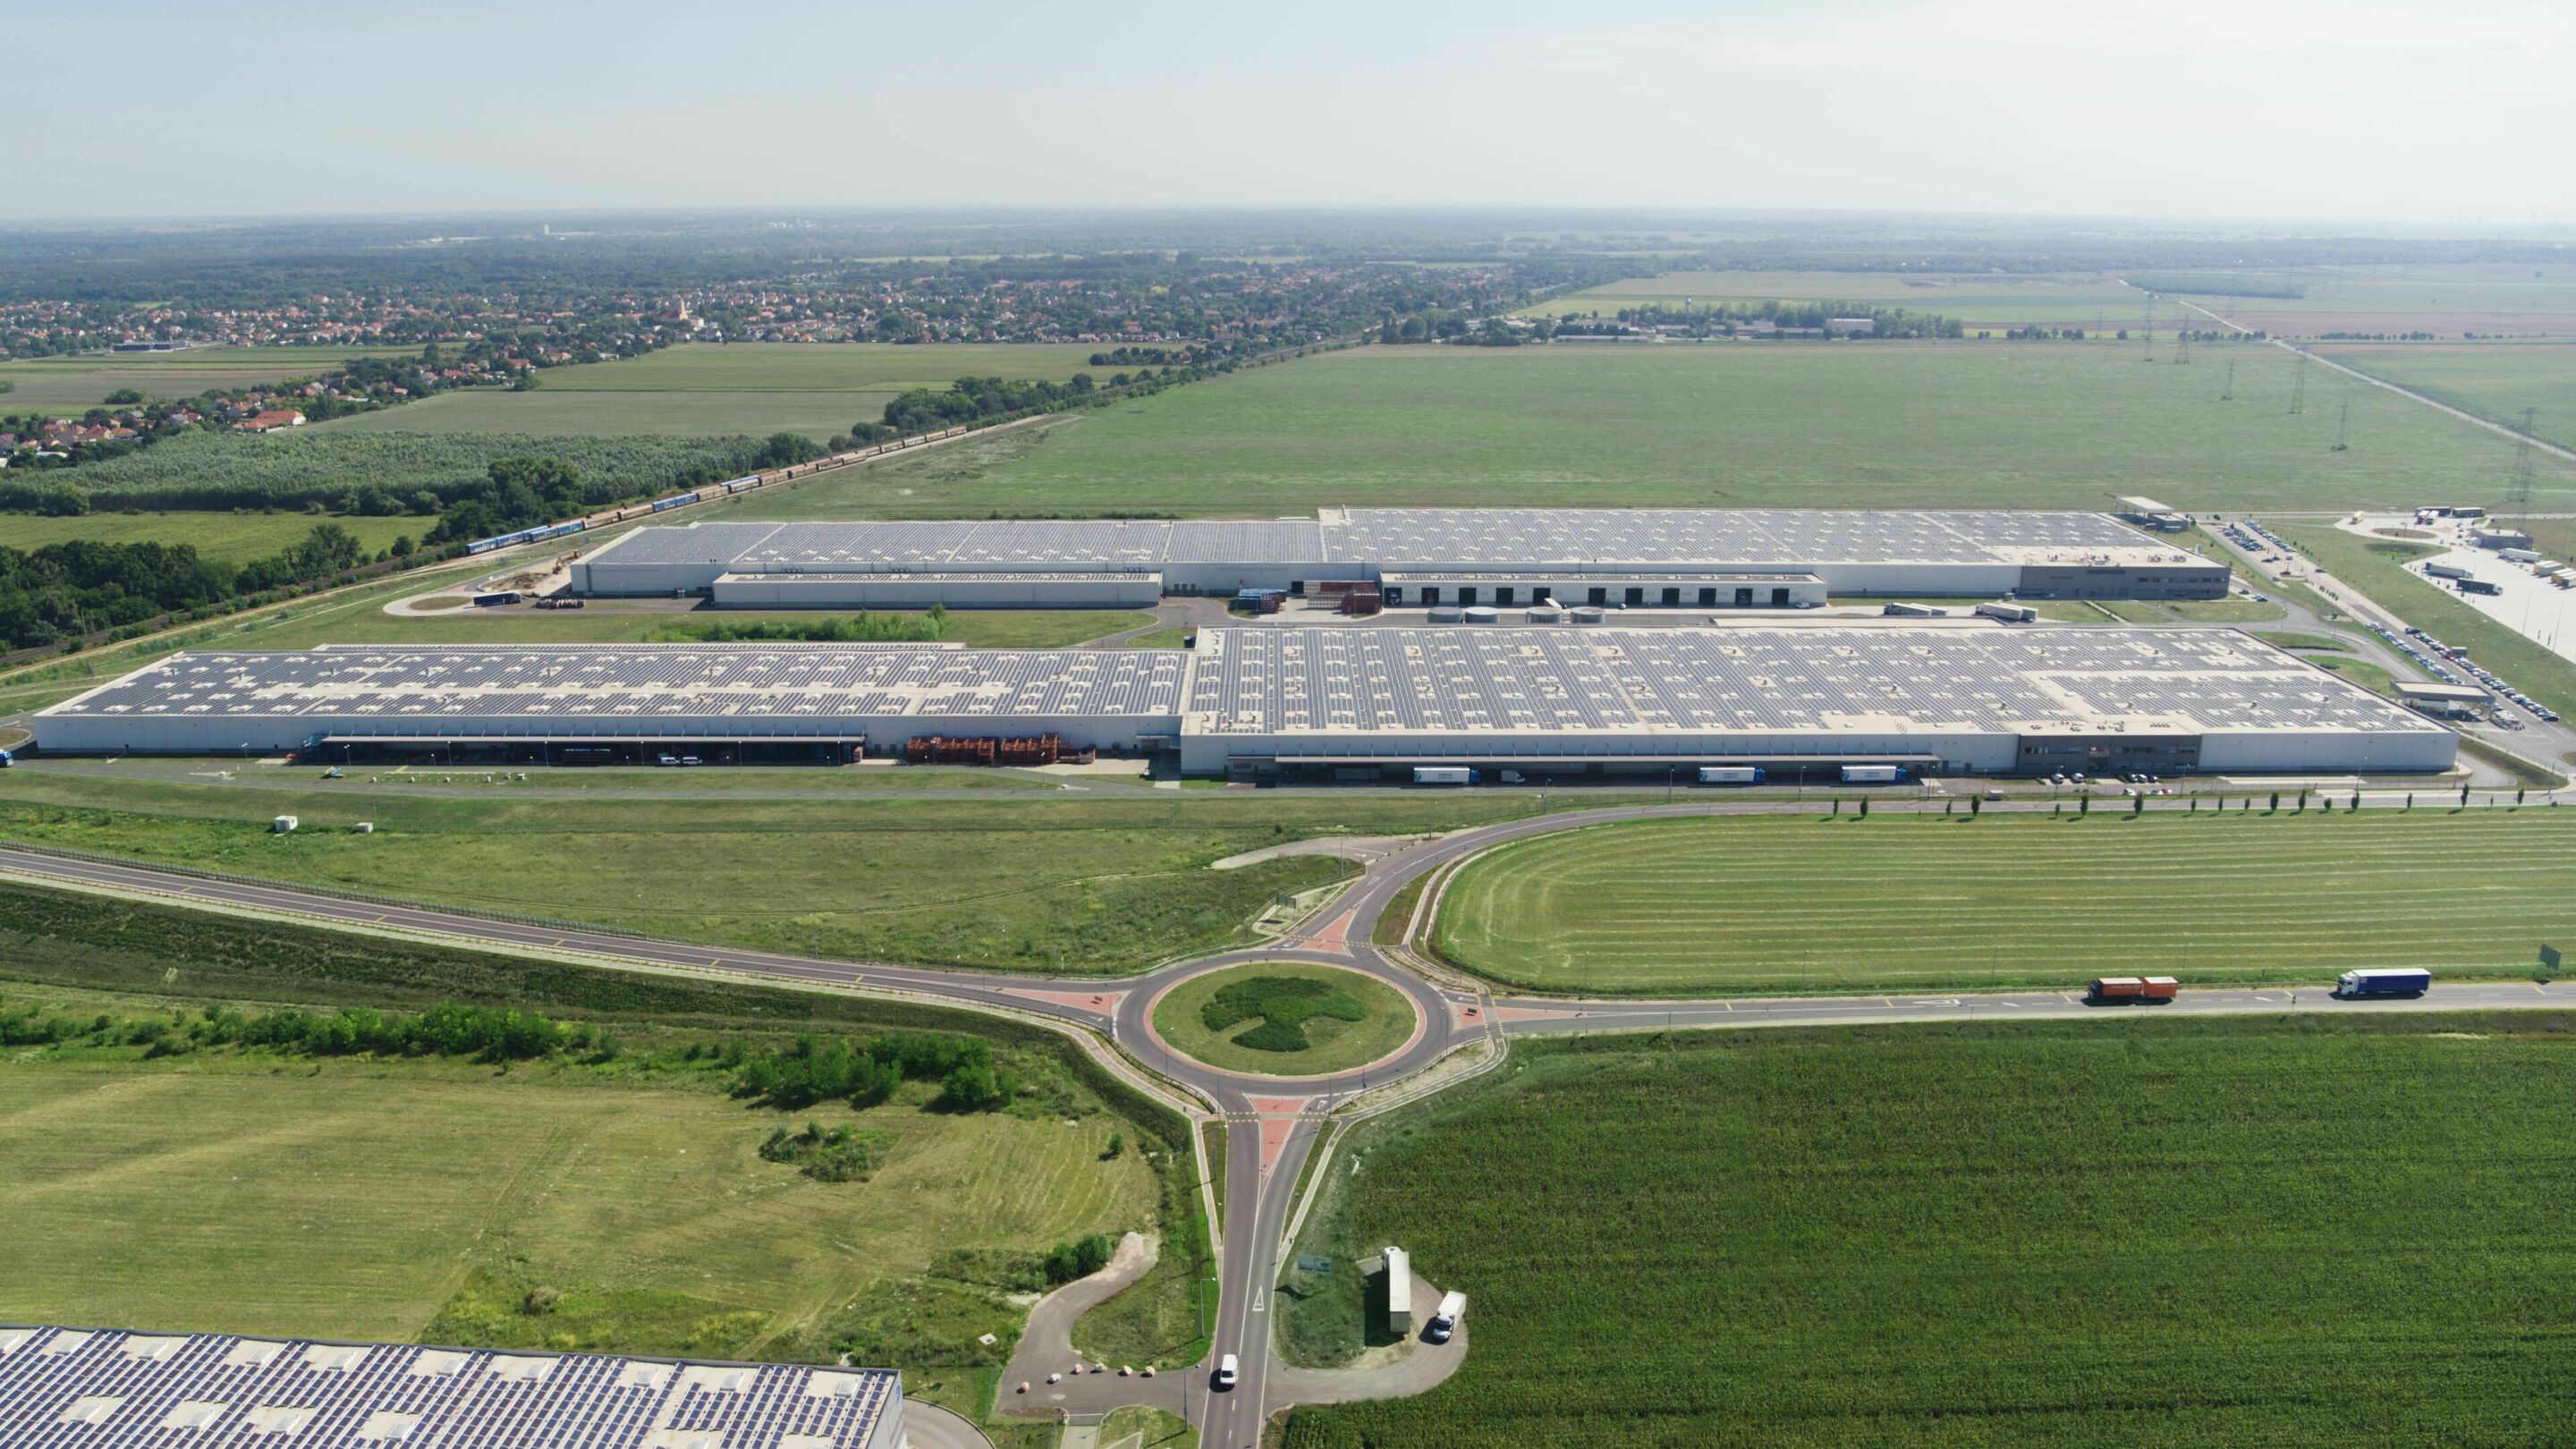 Audi Hungaria: Photovoltaic system on the roofs of the two logistics halls